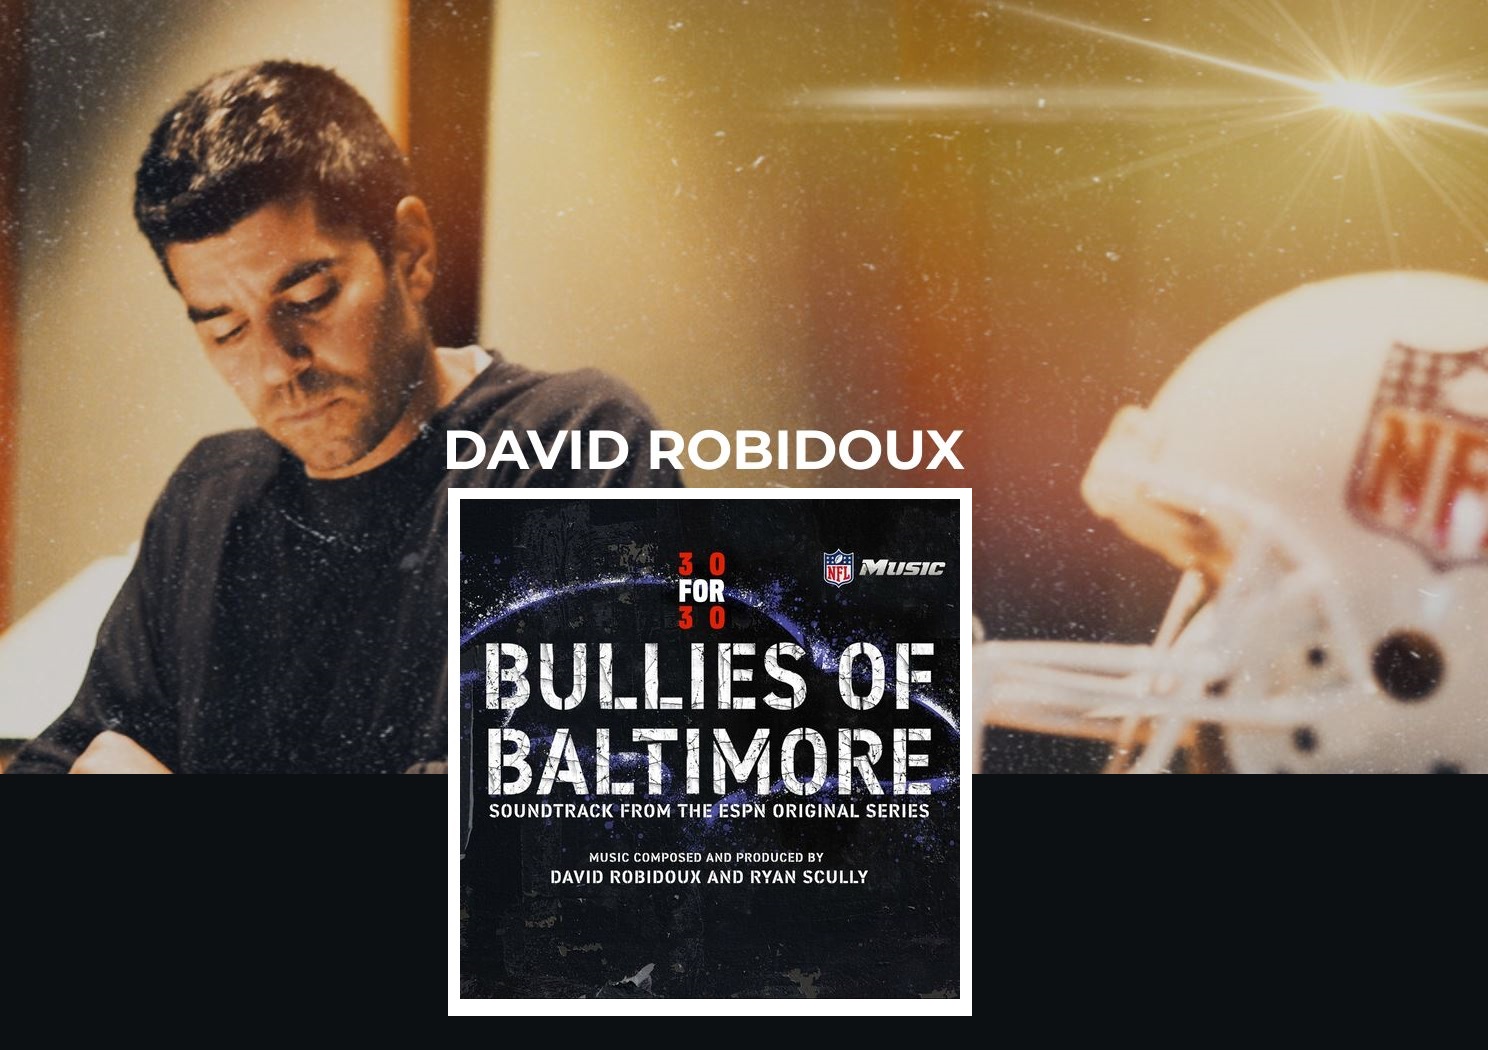 30 for 30: Bullies of Baltimore